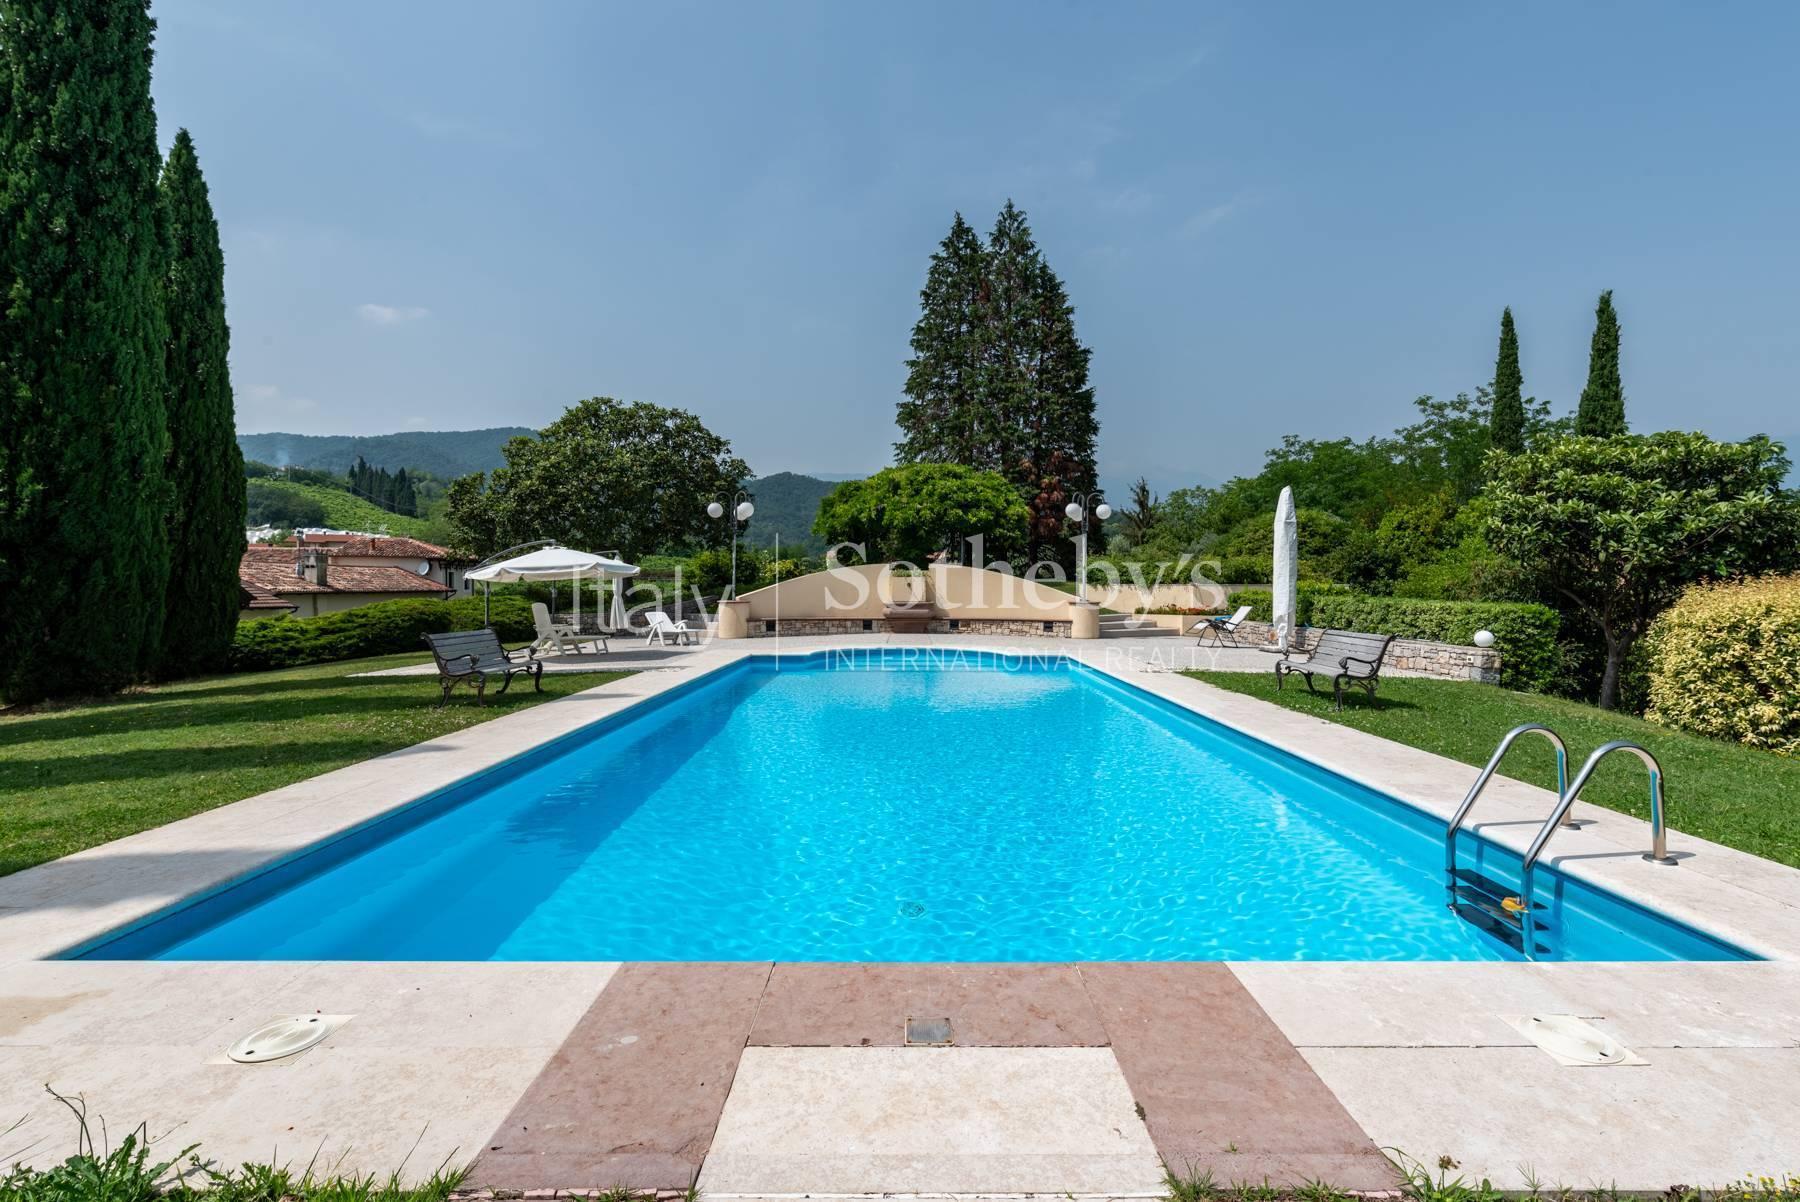 Elegant historic villa with hilly park and swimming pool - 6